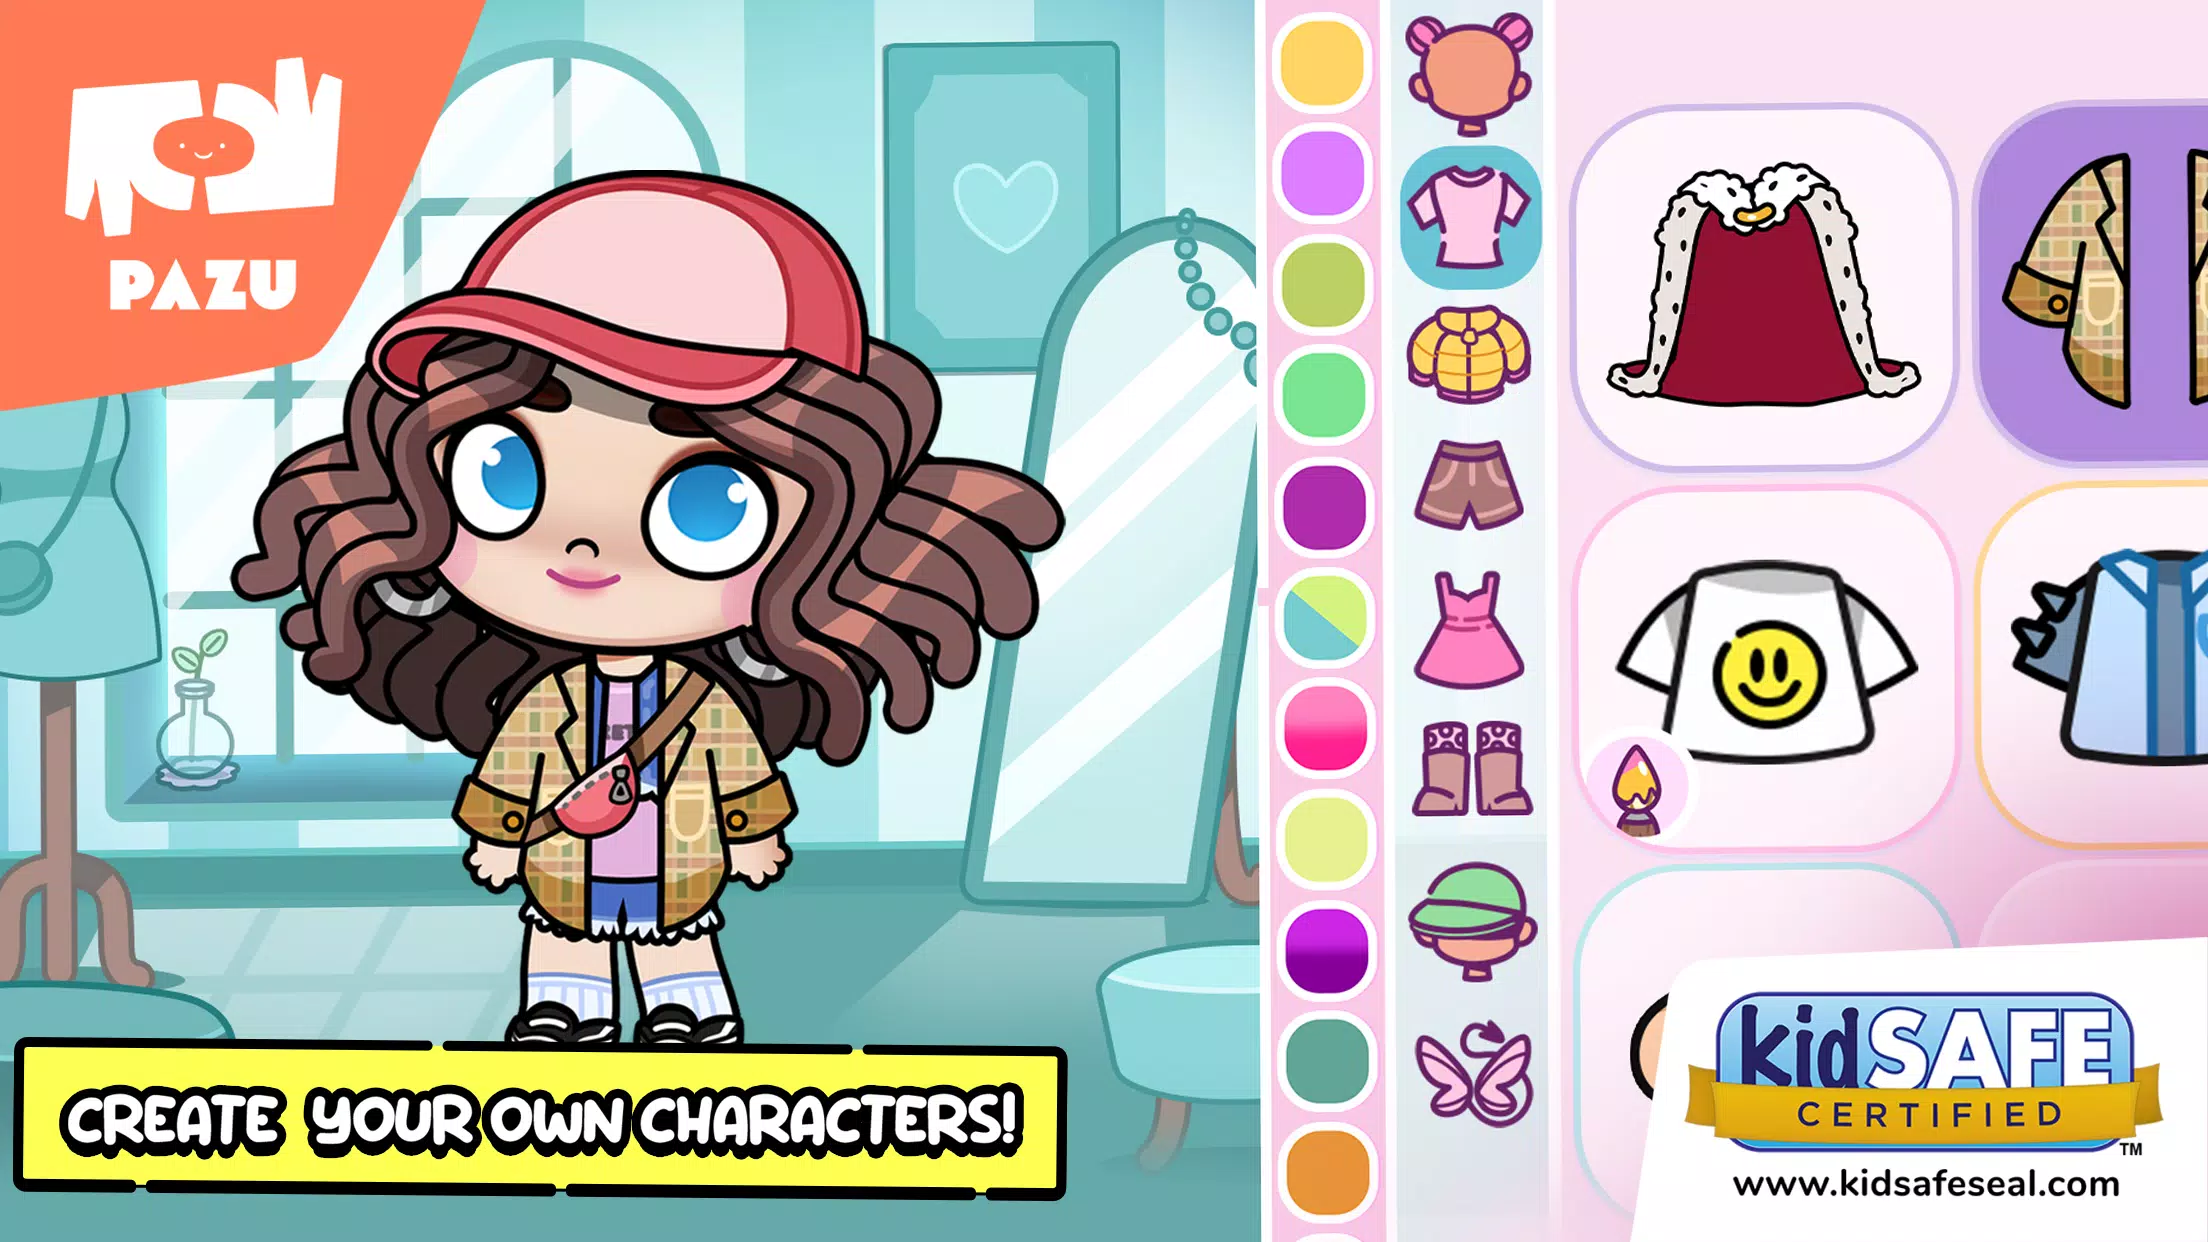 Avatar Maker-Dress up - APK Download for Android